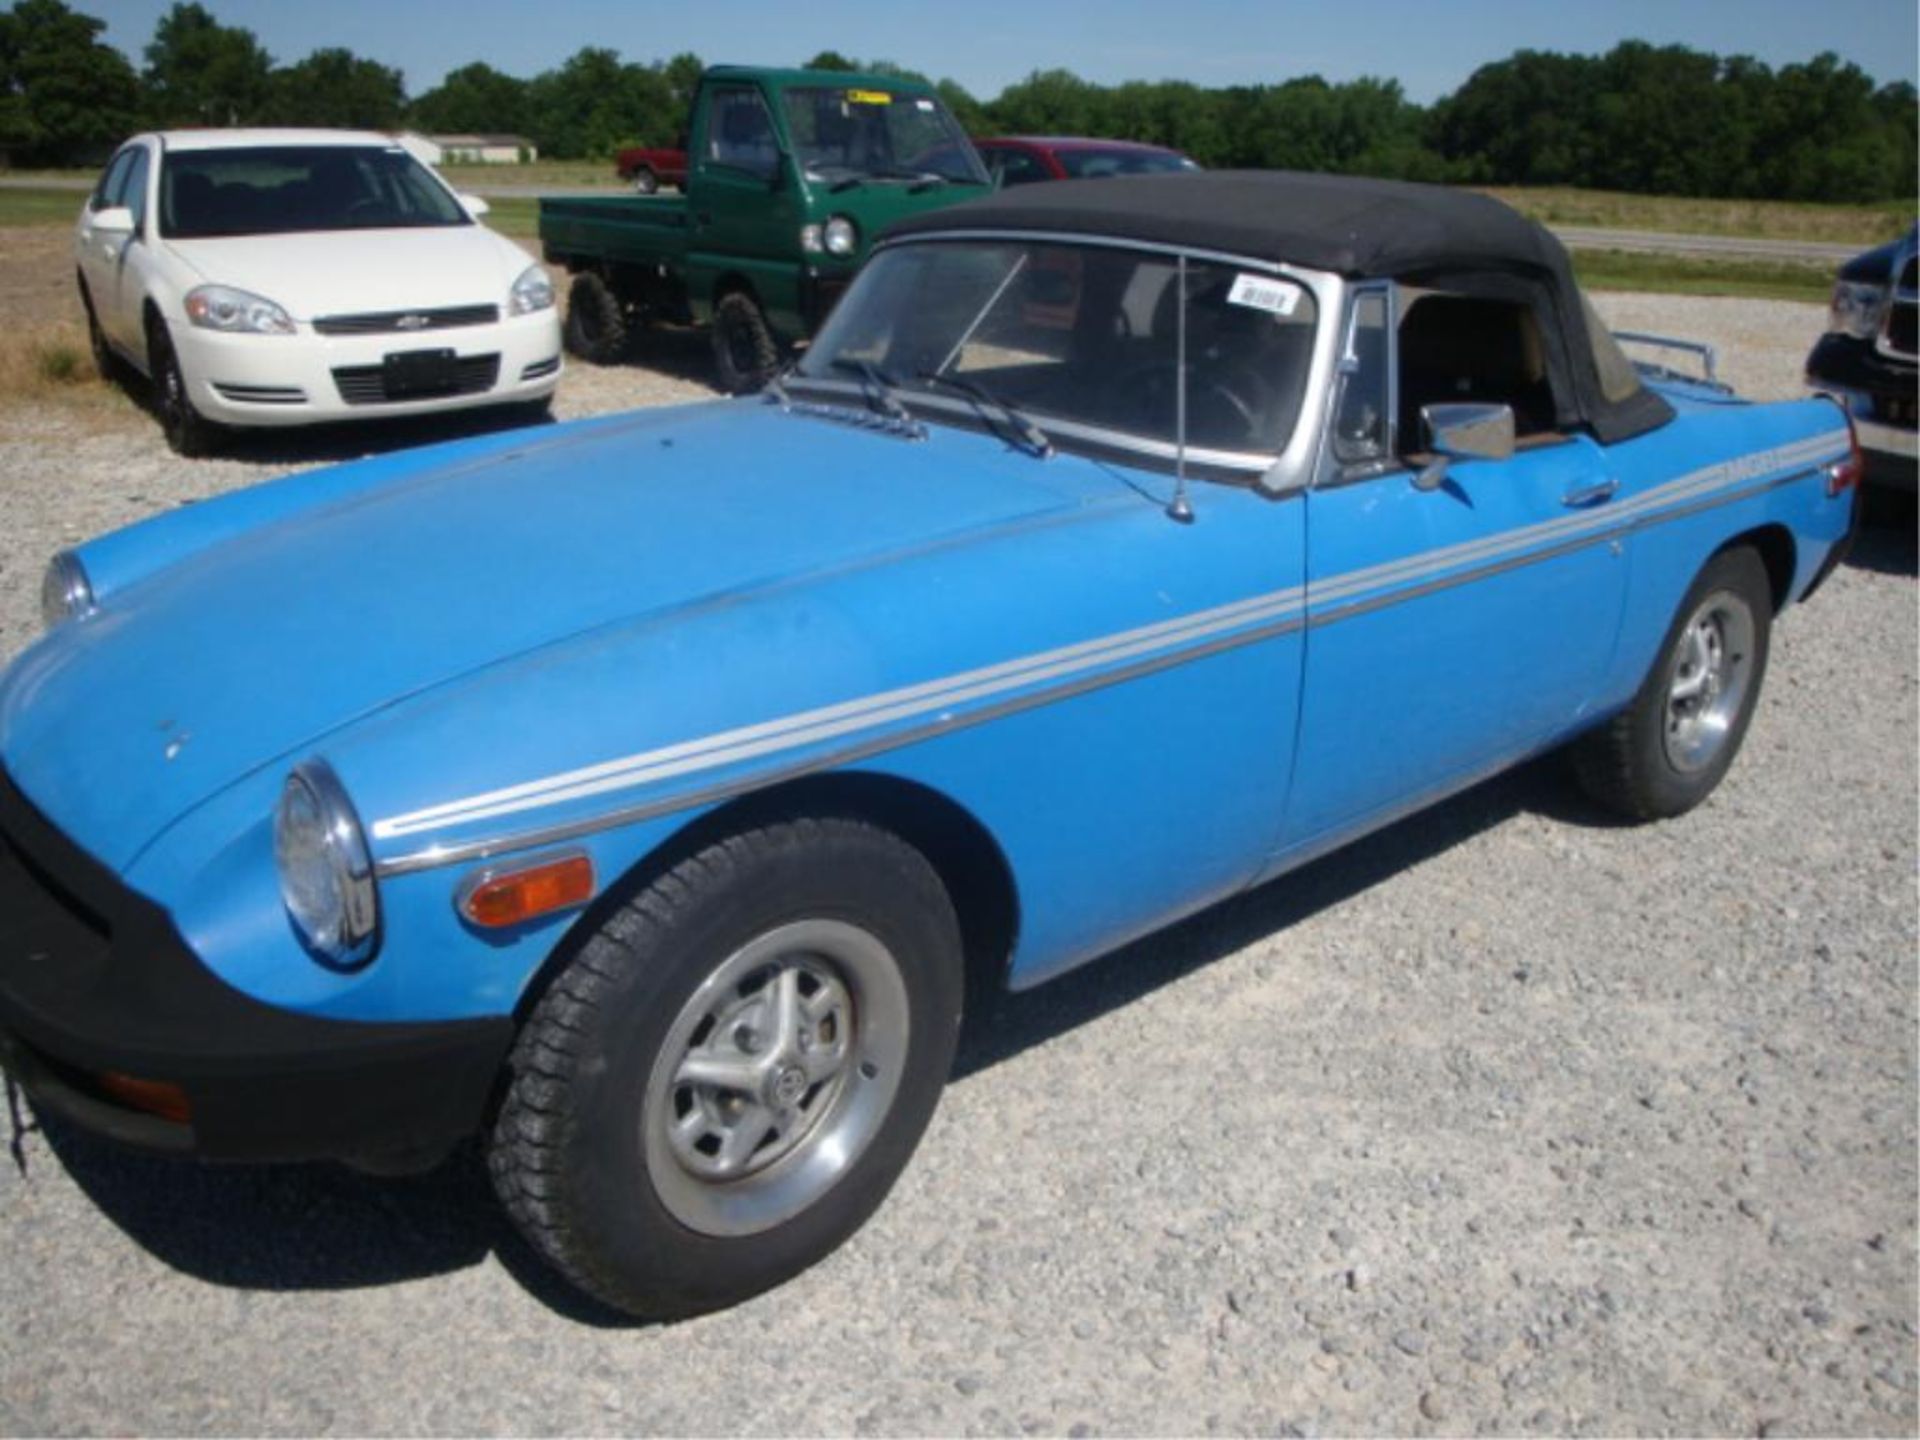 (Title) 1979 MGB, 14,890 miles on ODO,New in 2014: fuel pump, gas tank, clutch, radiator rodded